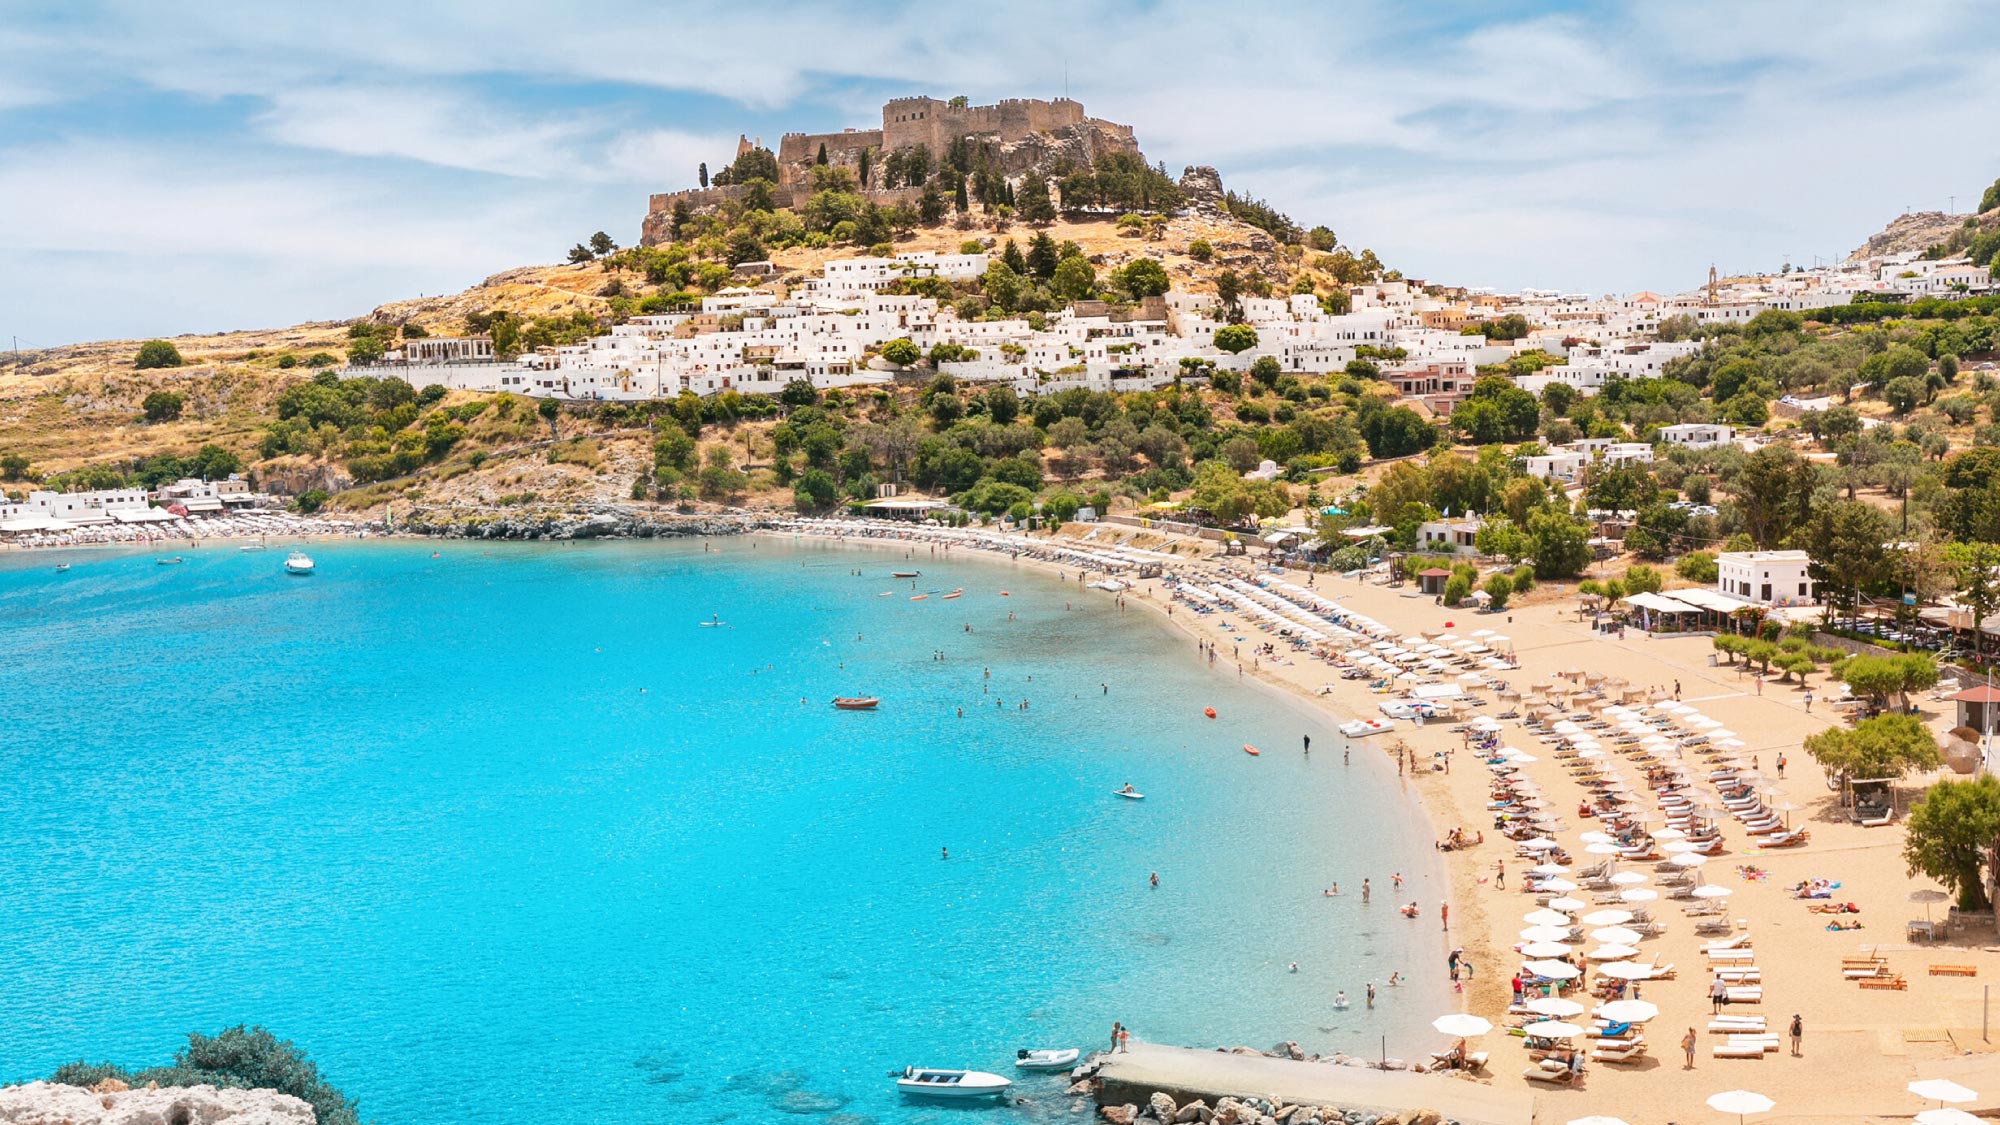 Capture the allure of Rhodes in Greece, a captivating stop on the journey to Australia spanning 21 countries, tailored for self-flying pilots. Immerse yourself in the island's rich history and picturesque landscapes as you explore this enchanting Mediterranean destination.